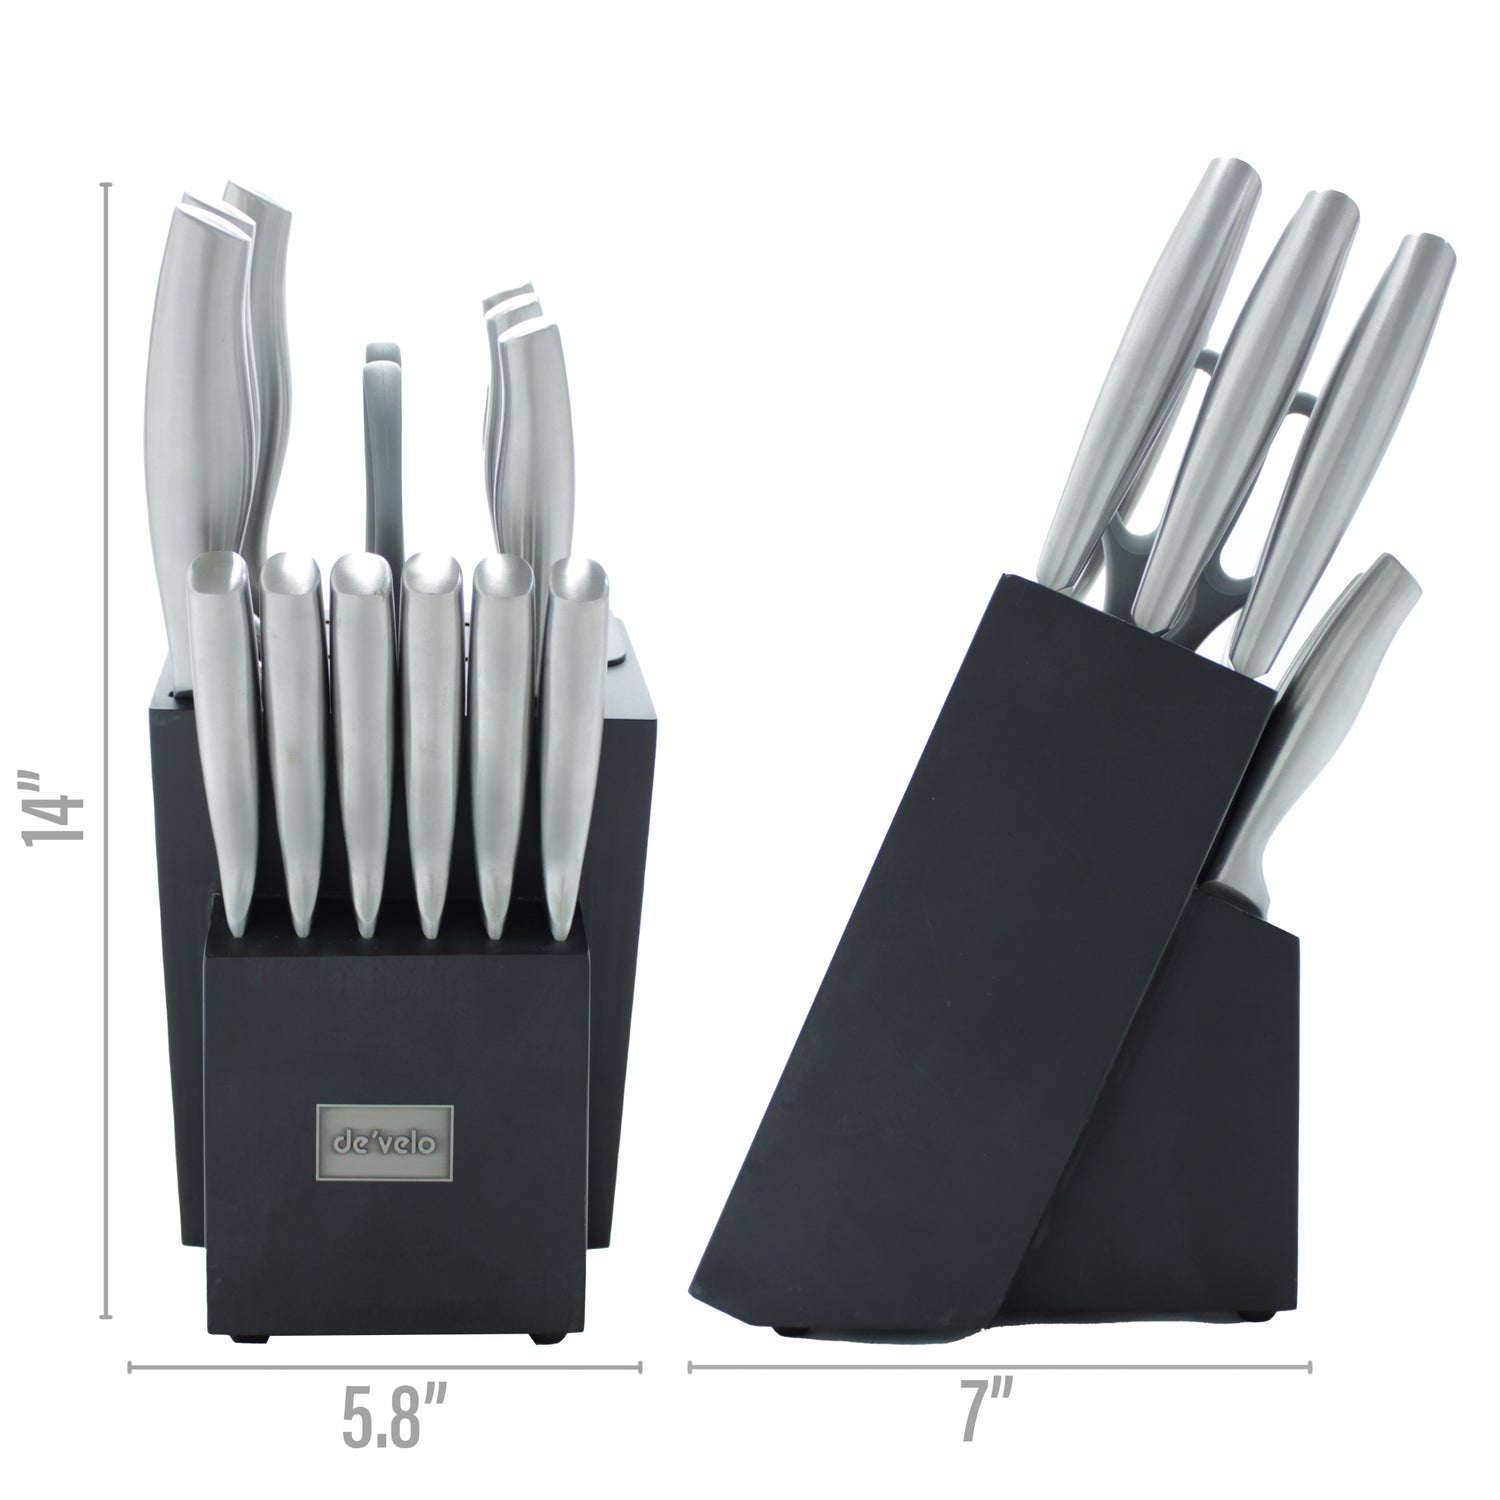 AMEGAT 15-Piece Knife Set with Built-in Sharpener and Carving Fork, Ultra  Sharp Knife Block Set with Full Tang Design & Wooden Handle, High Carbon